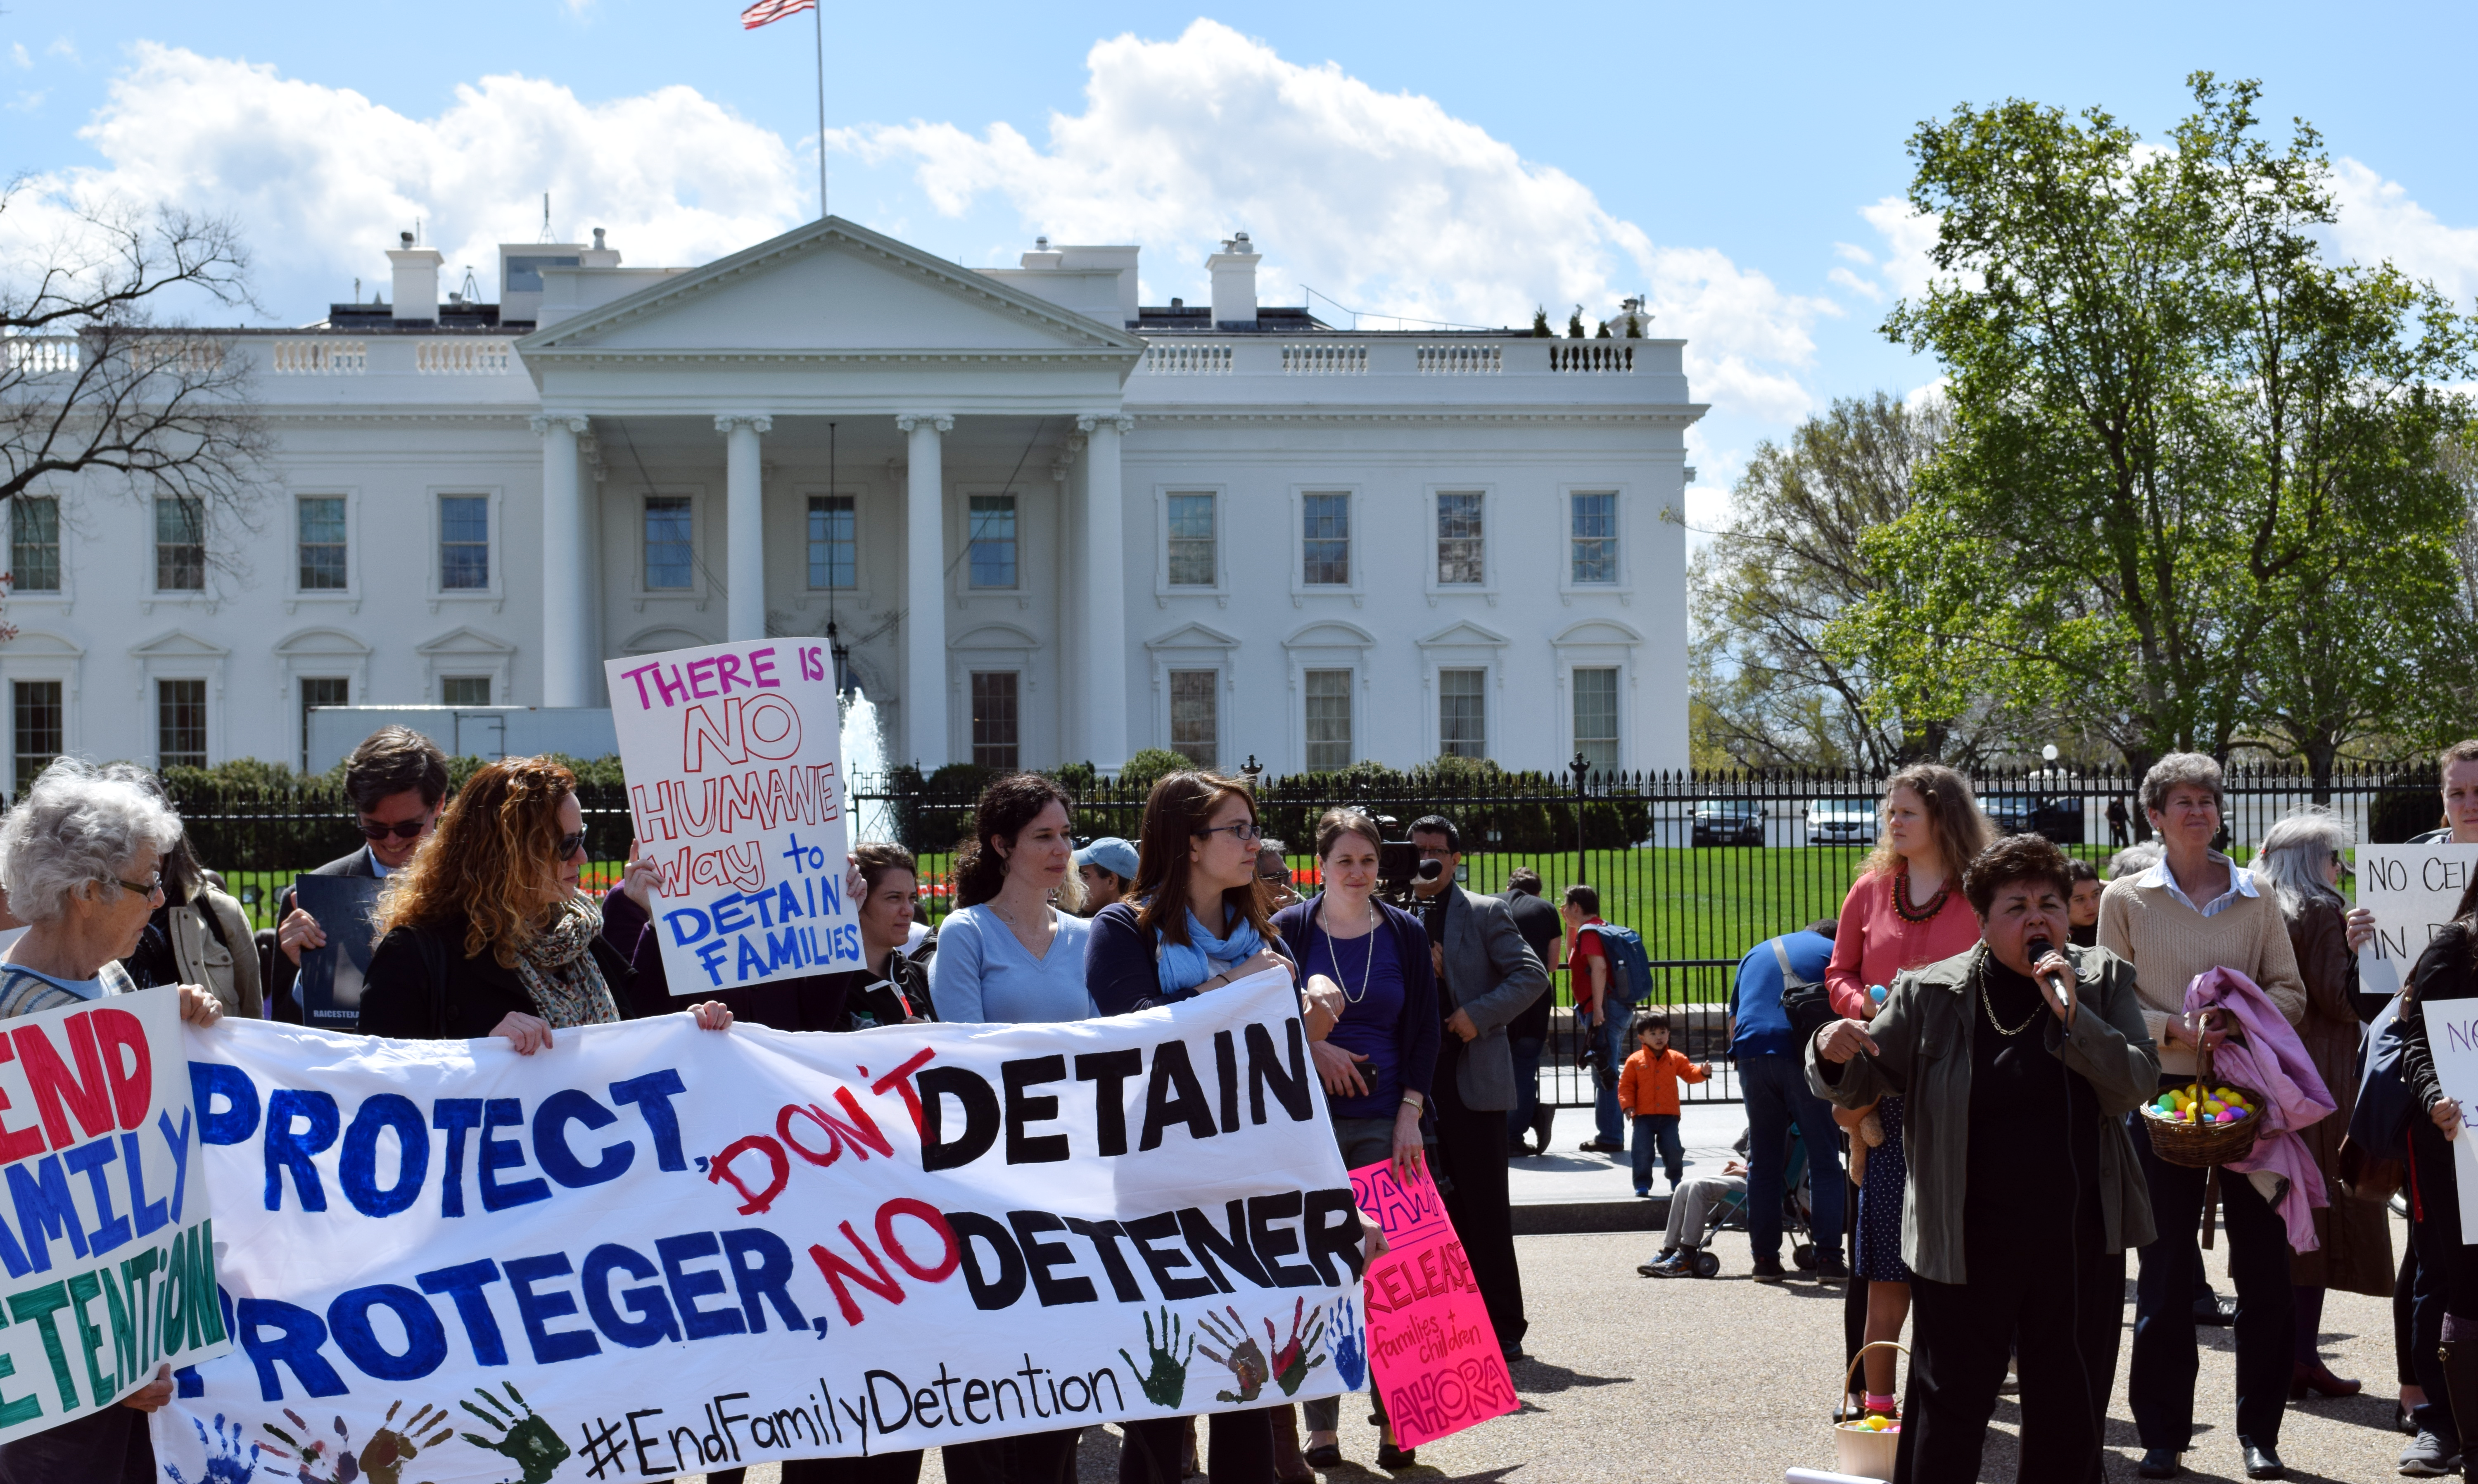 Religious Leaders, Formerly Detained Families, and Advocates Protest Family Detention at White House